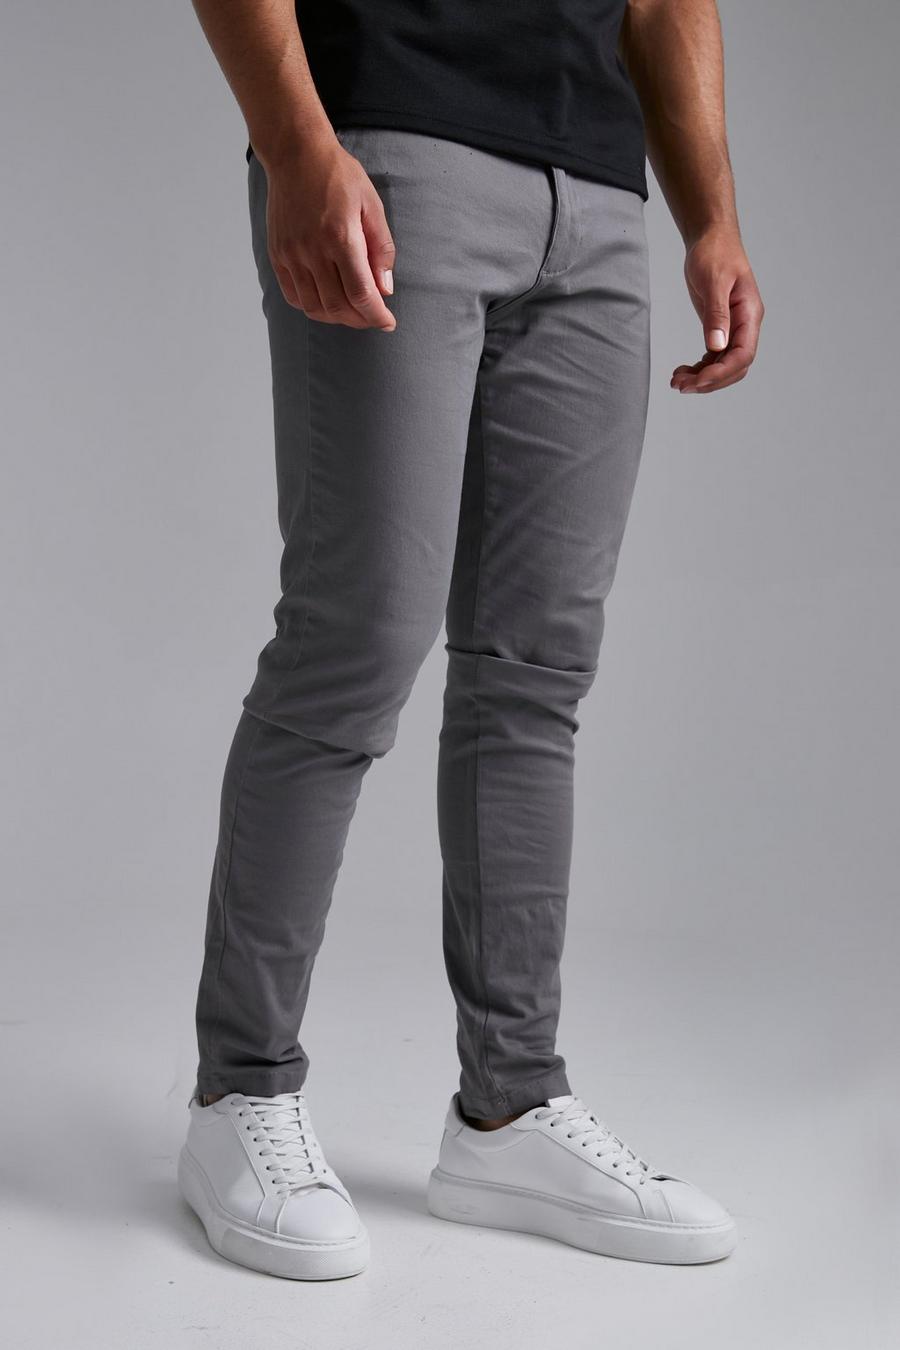 Tall Skinny Chino-Hose, Charcoal gris